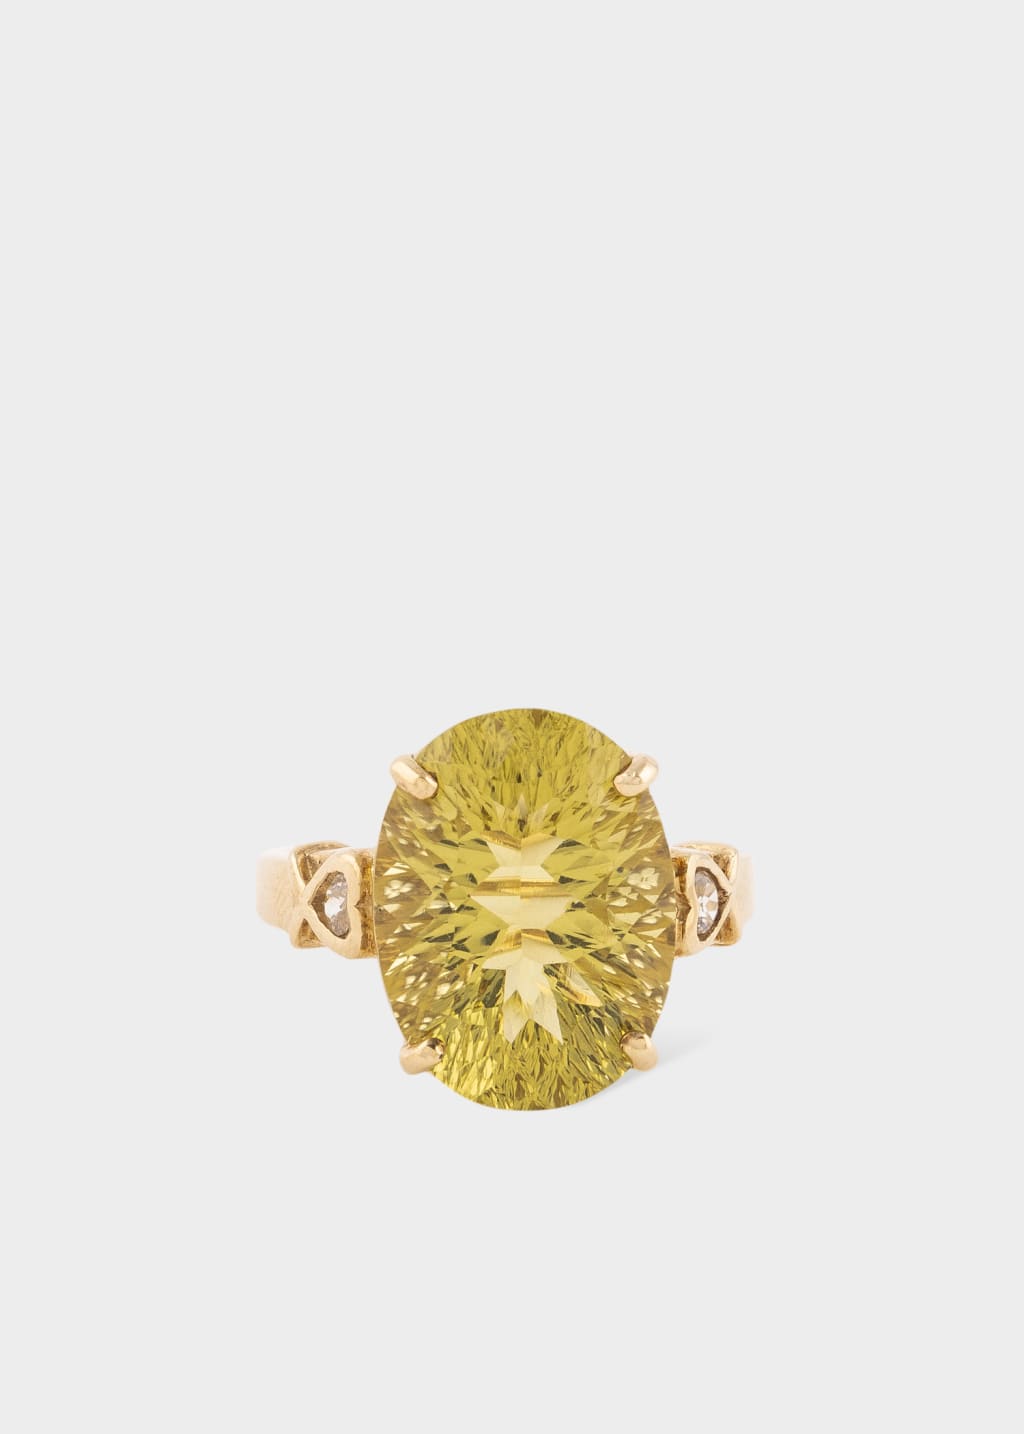 'Diamond and Sunburst Yellow Topaz' Gold Cocktail Ring by Baroque Rocks